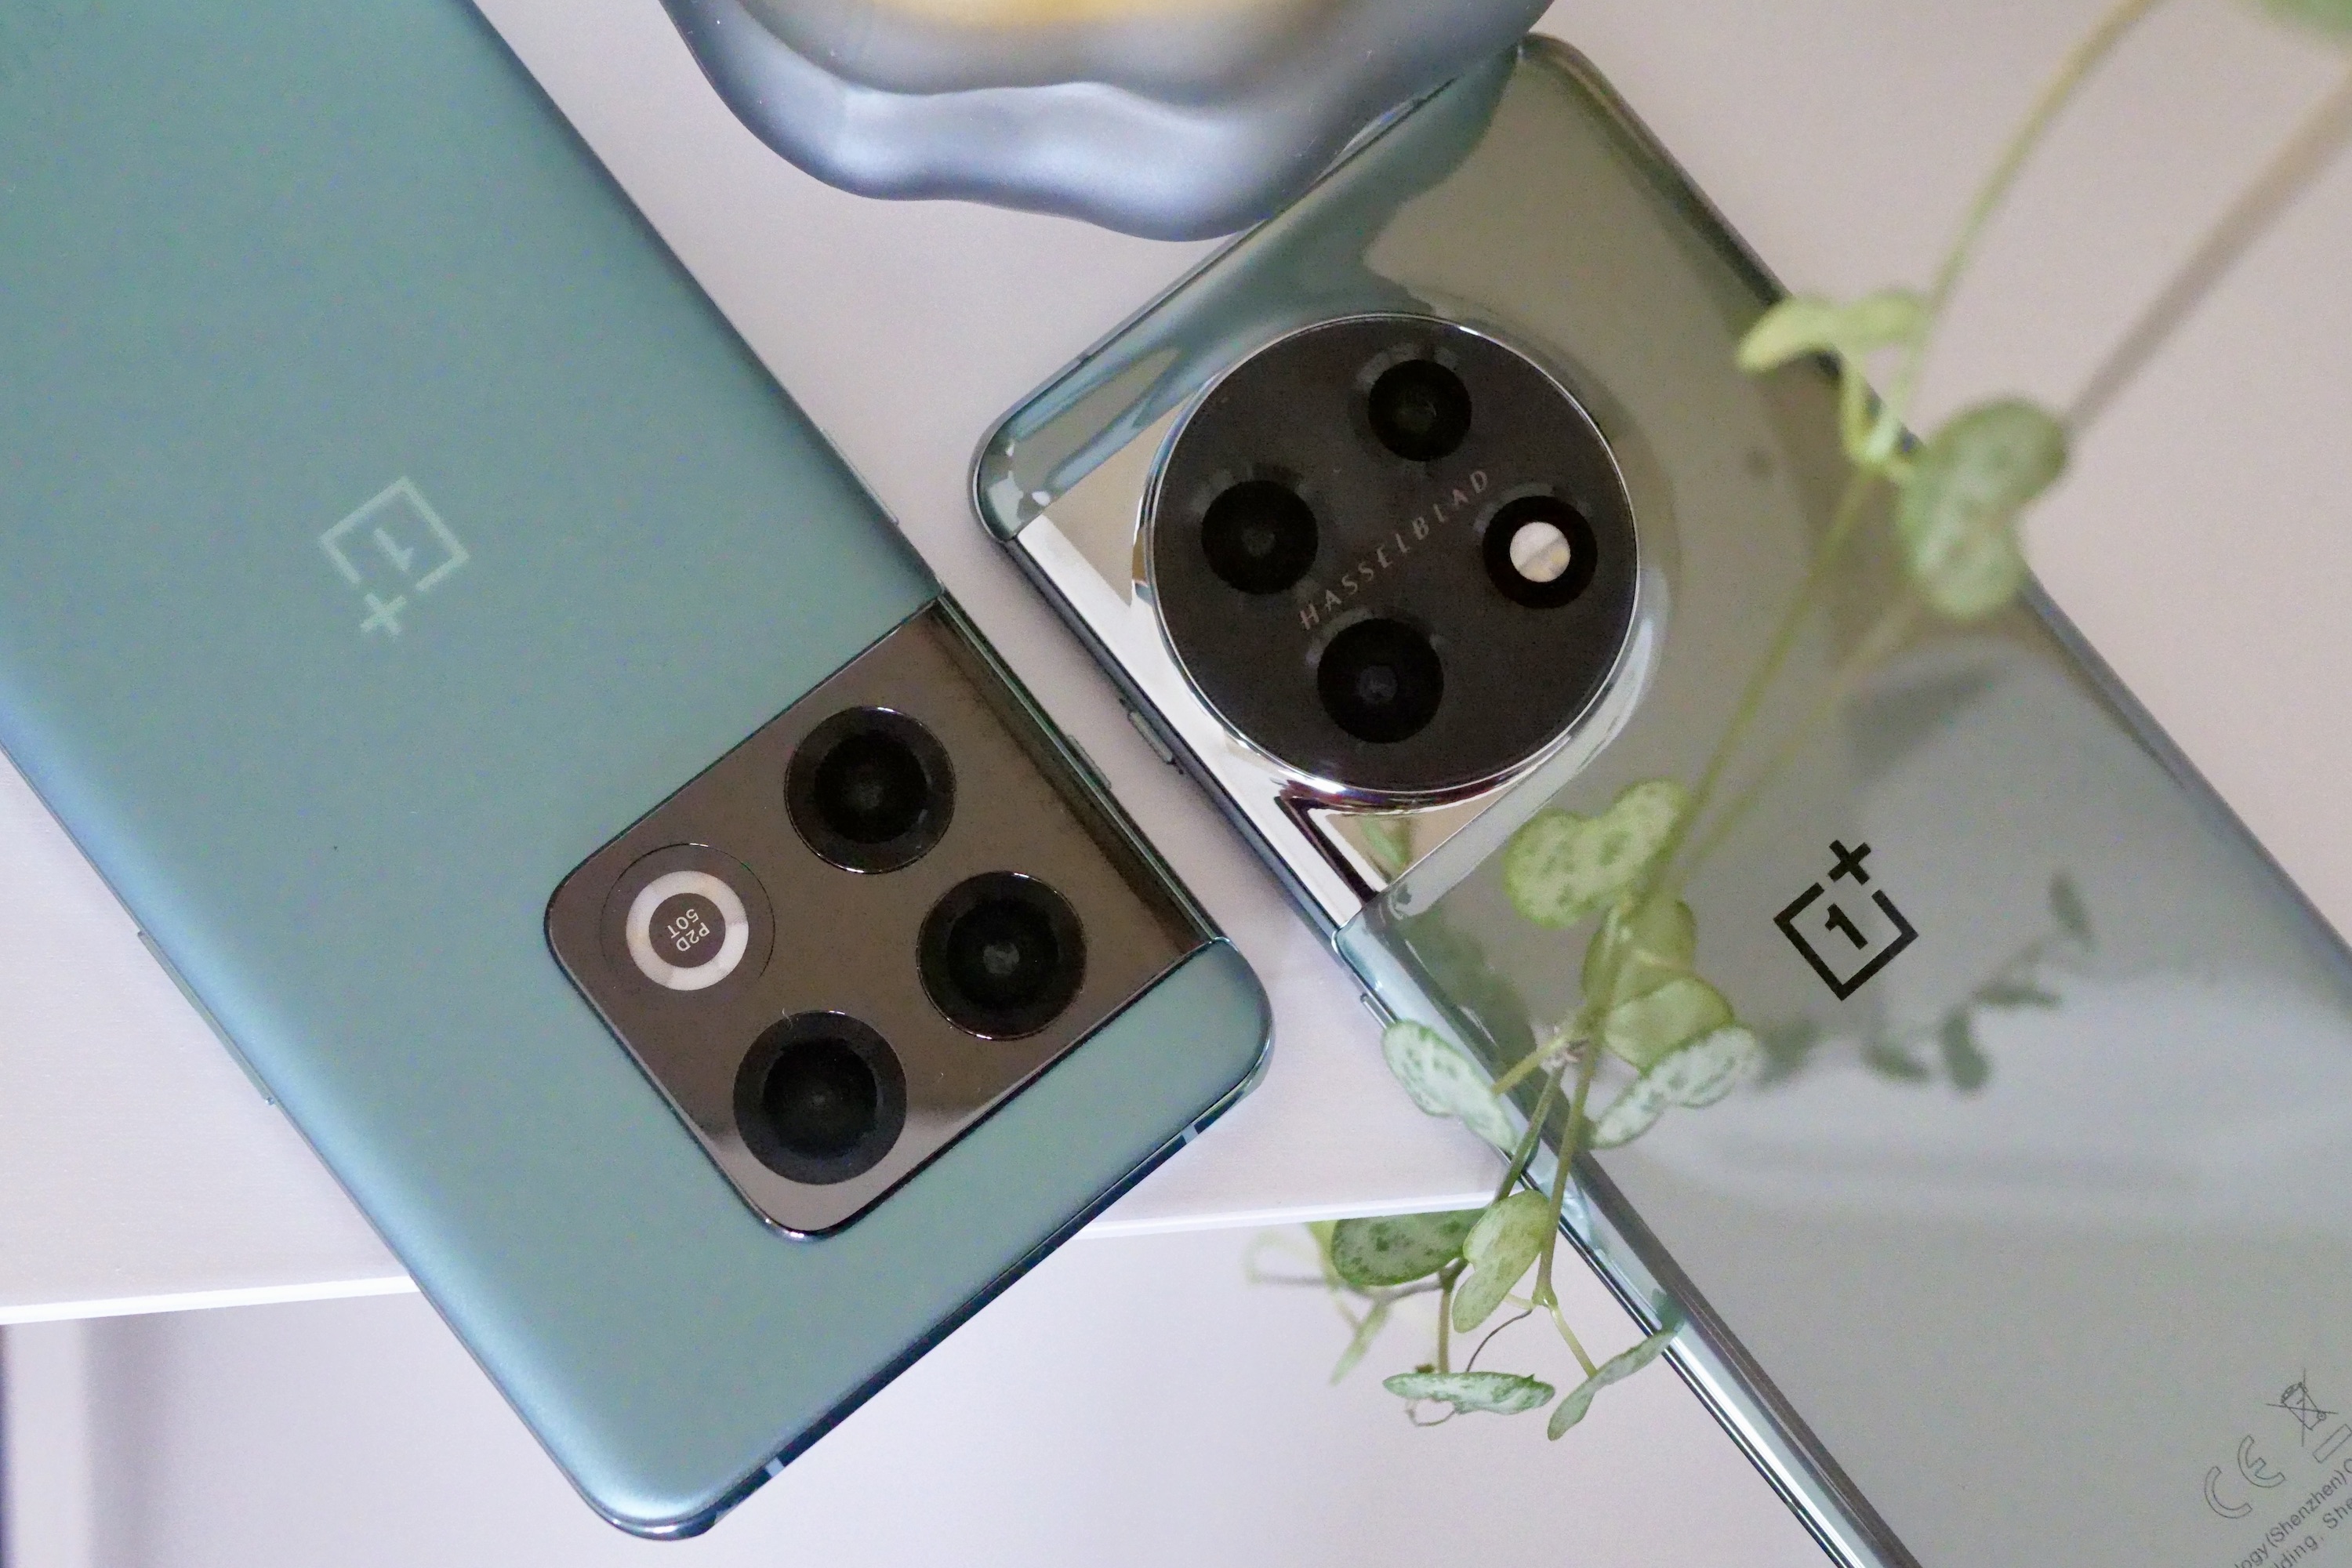 The OnePlus 11 and OnePlus 10 Pro camera modules.